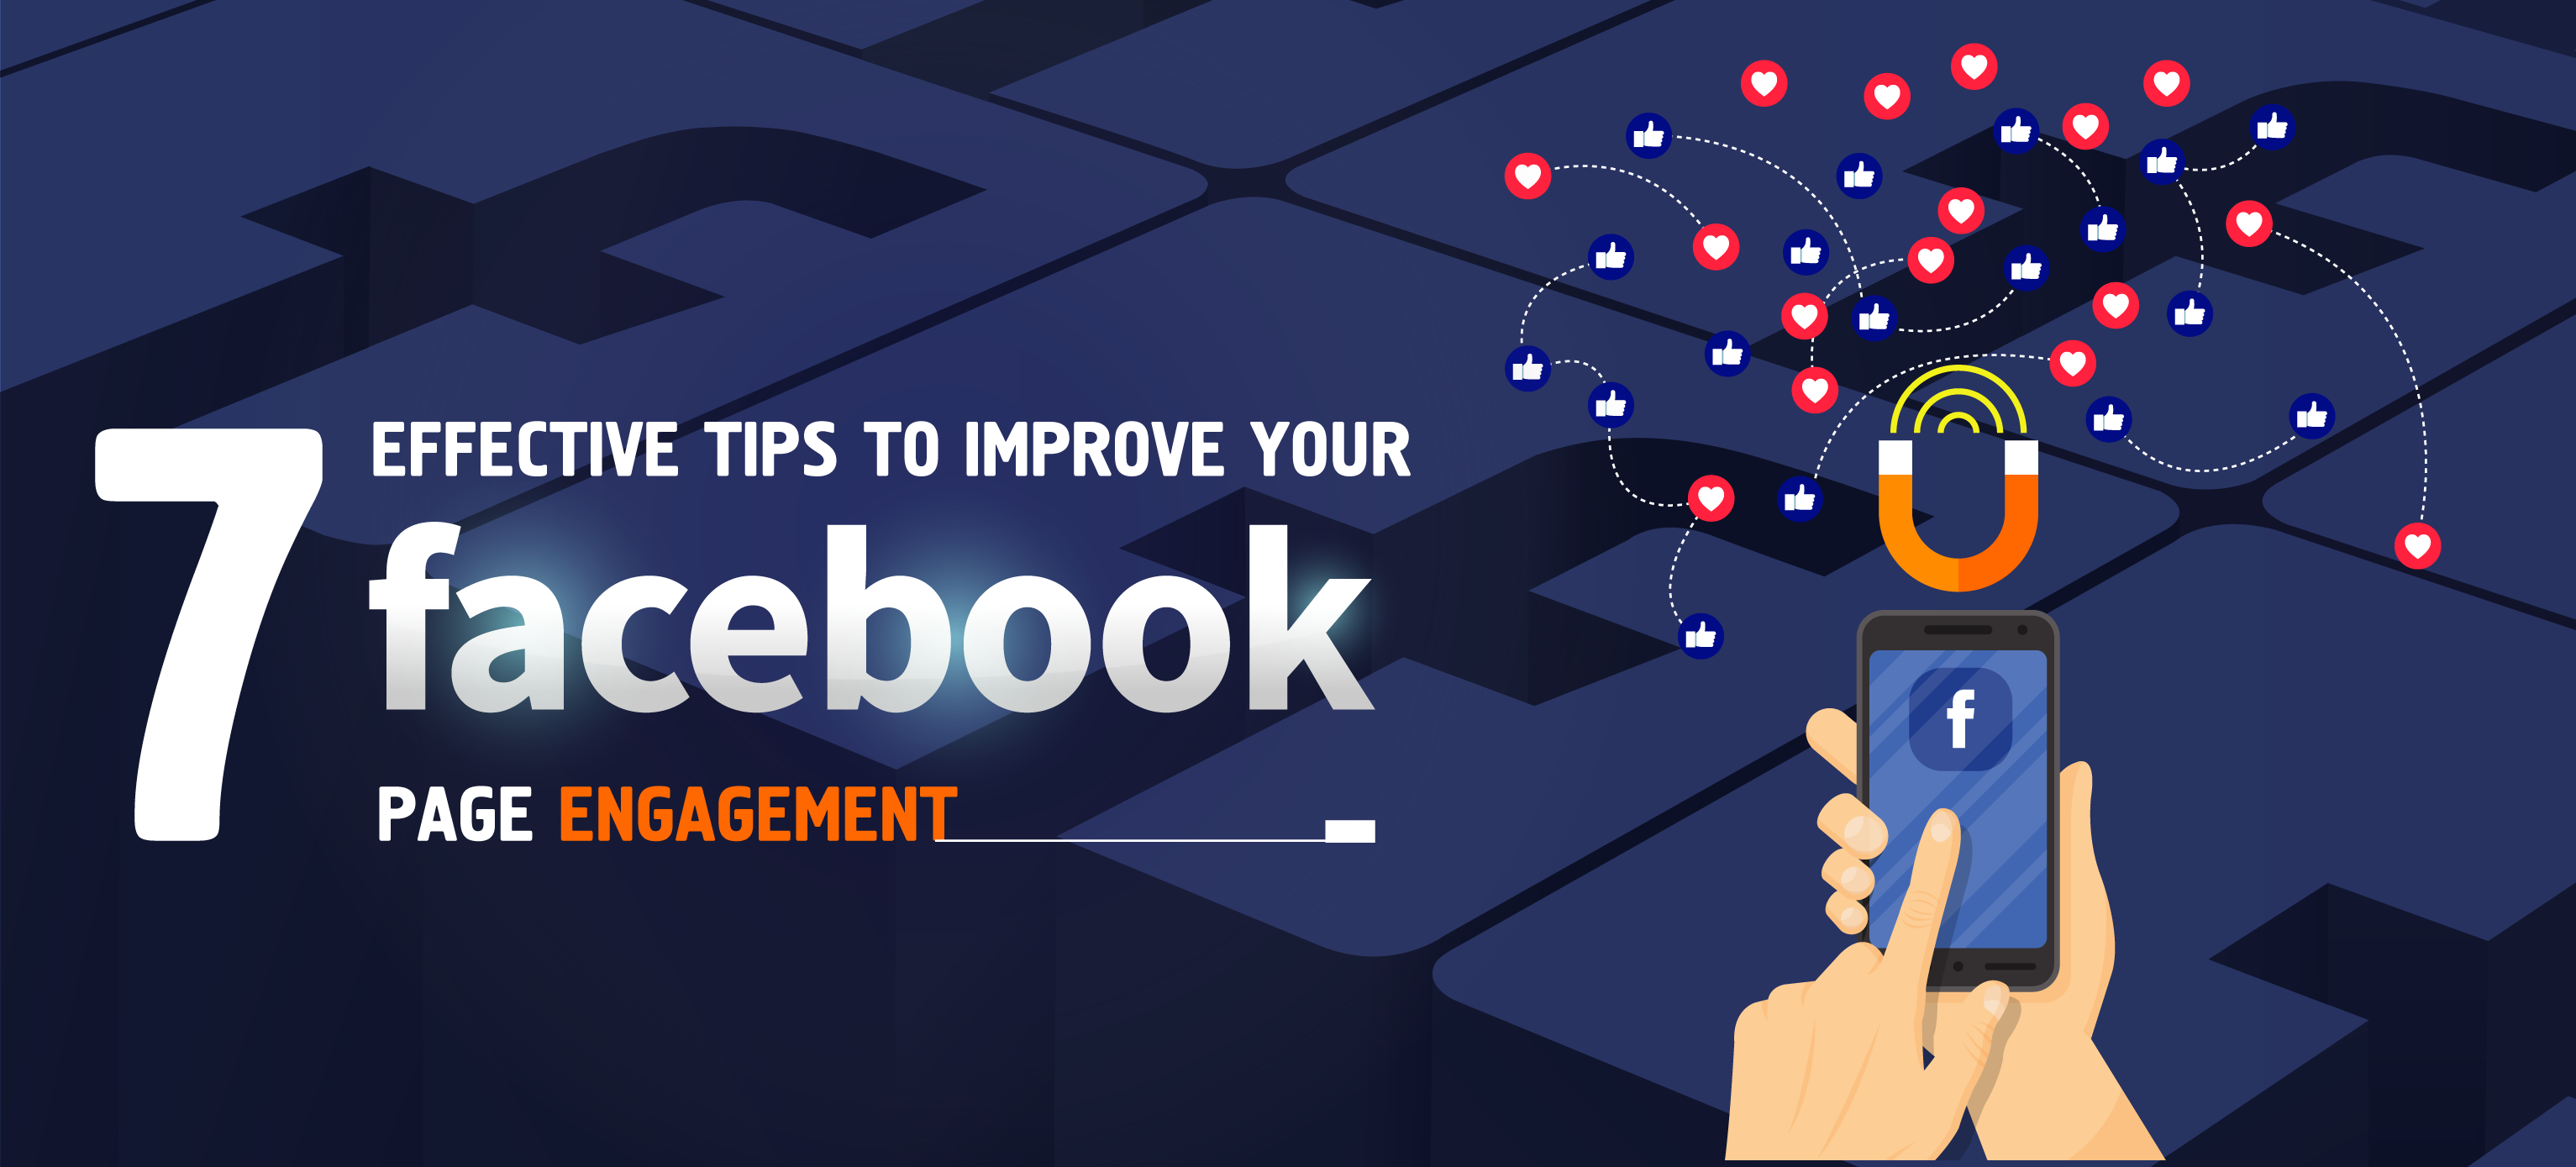 7 Easy Tips for Improving Your Facebook Page Engagement